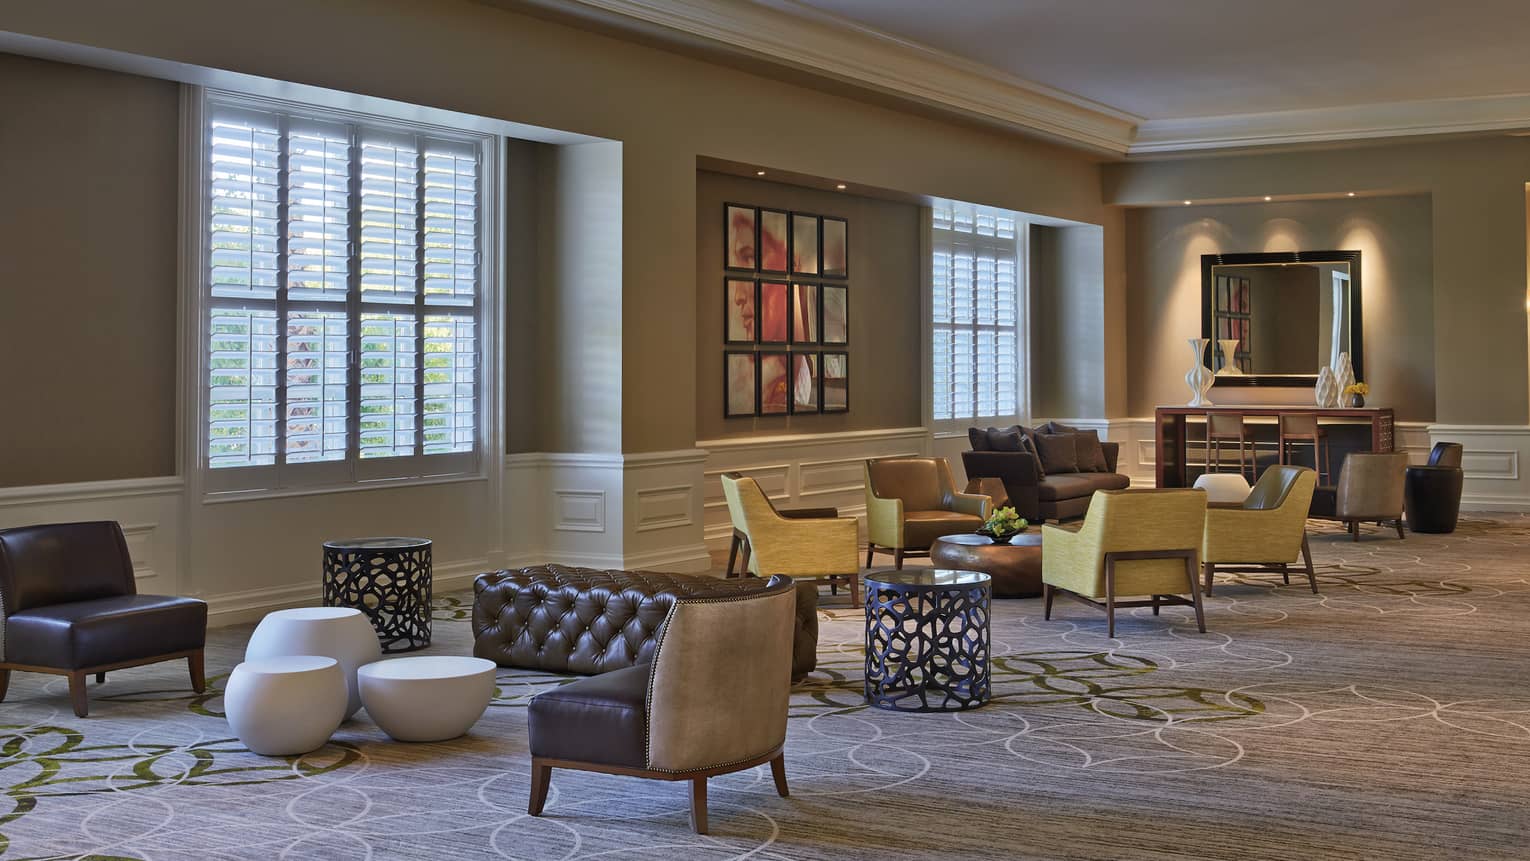 Modern armchairs, ottomans by windows in carpeted Four Seasons Ballroom Foyer